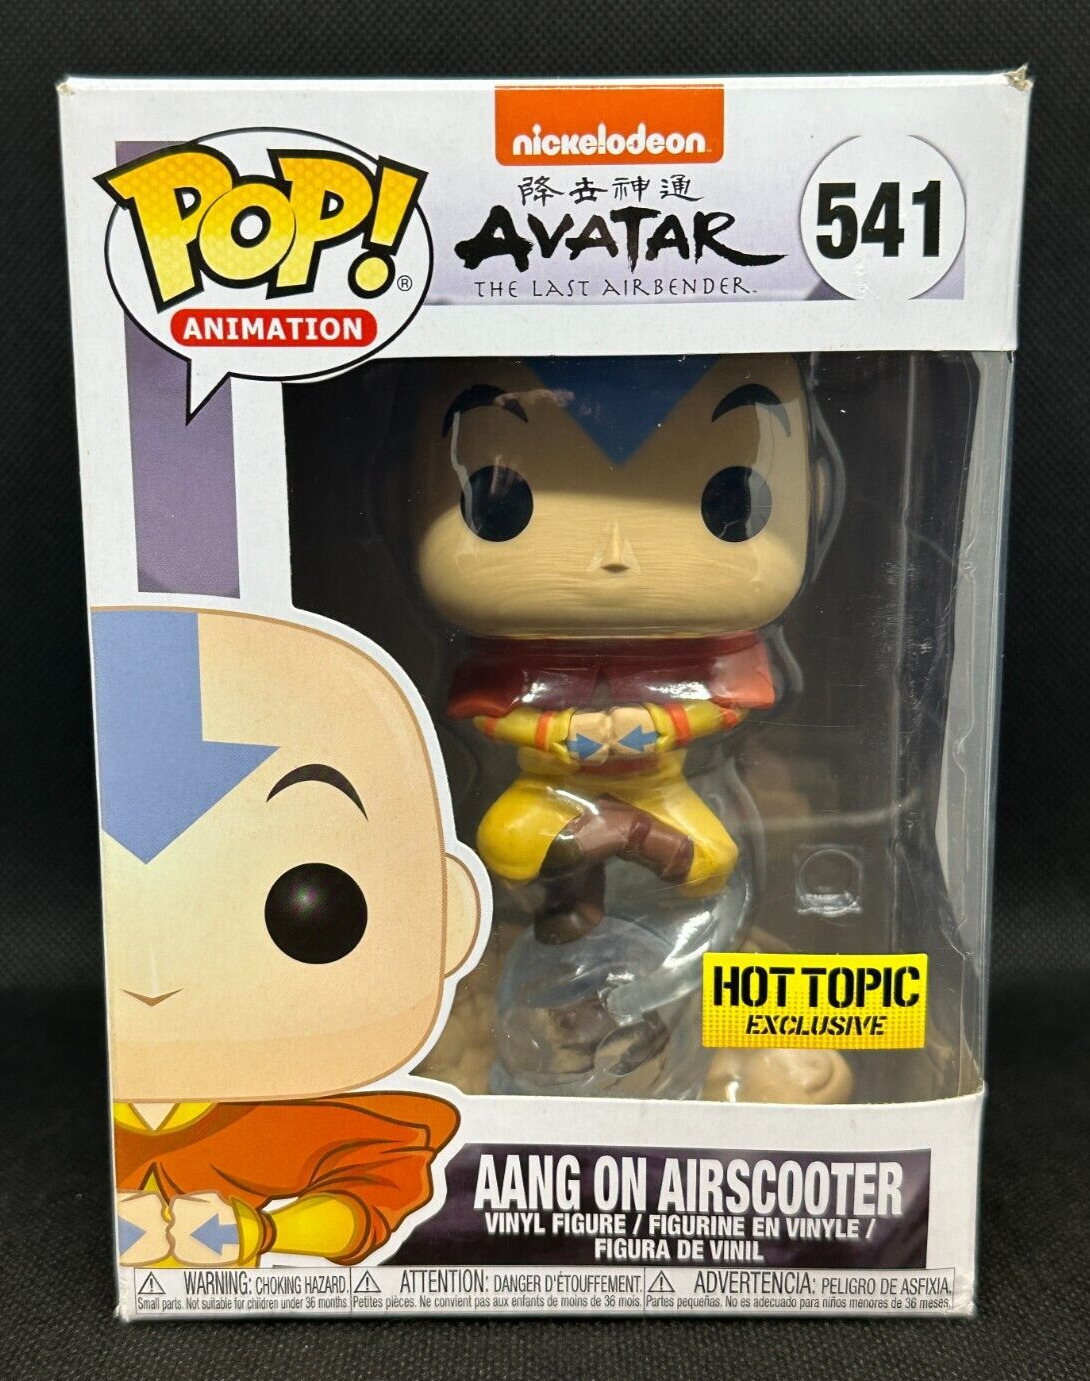 Funko Pop Aang on Airscooter 541 Nickelodeon Avatar Hot Topic Exclusive Figure